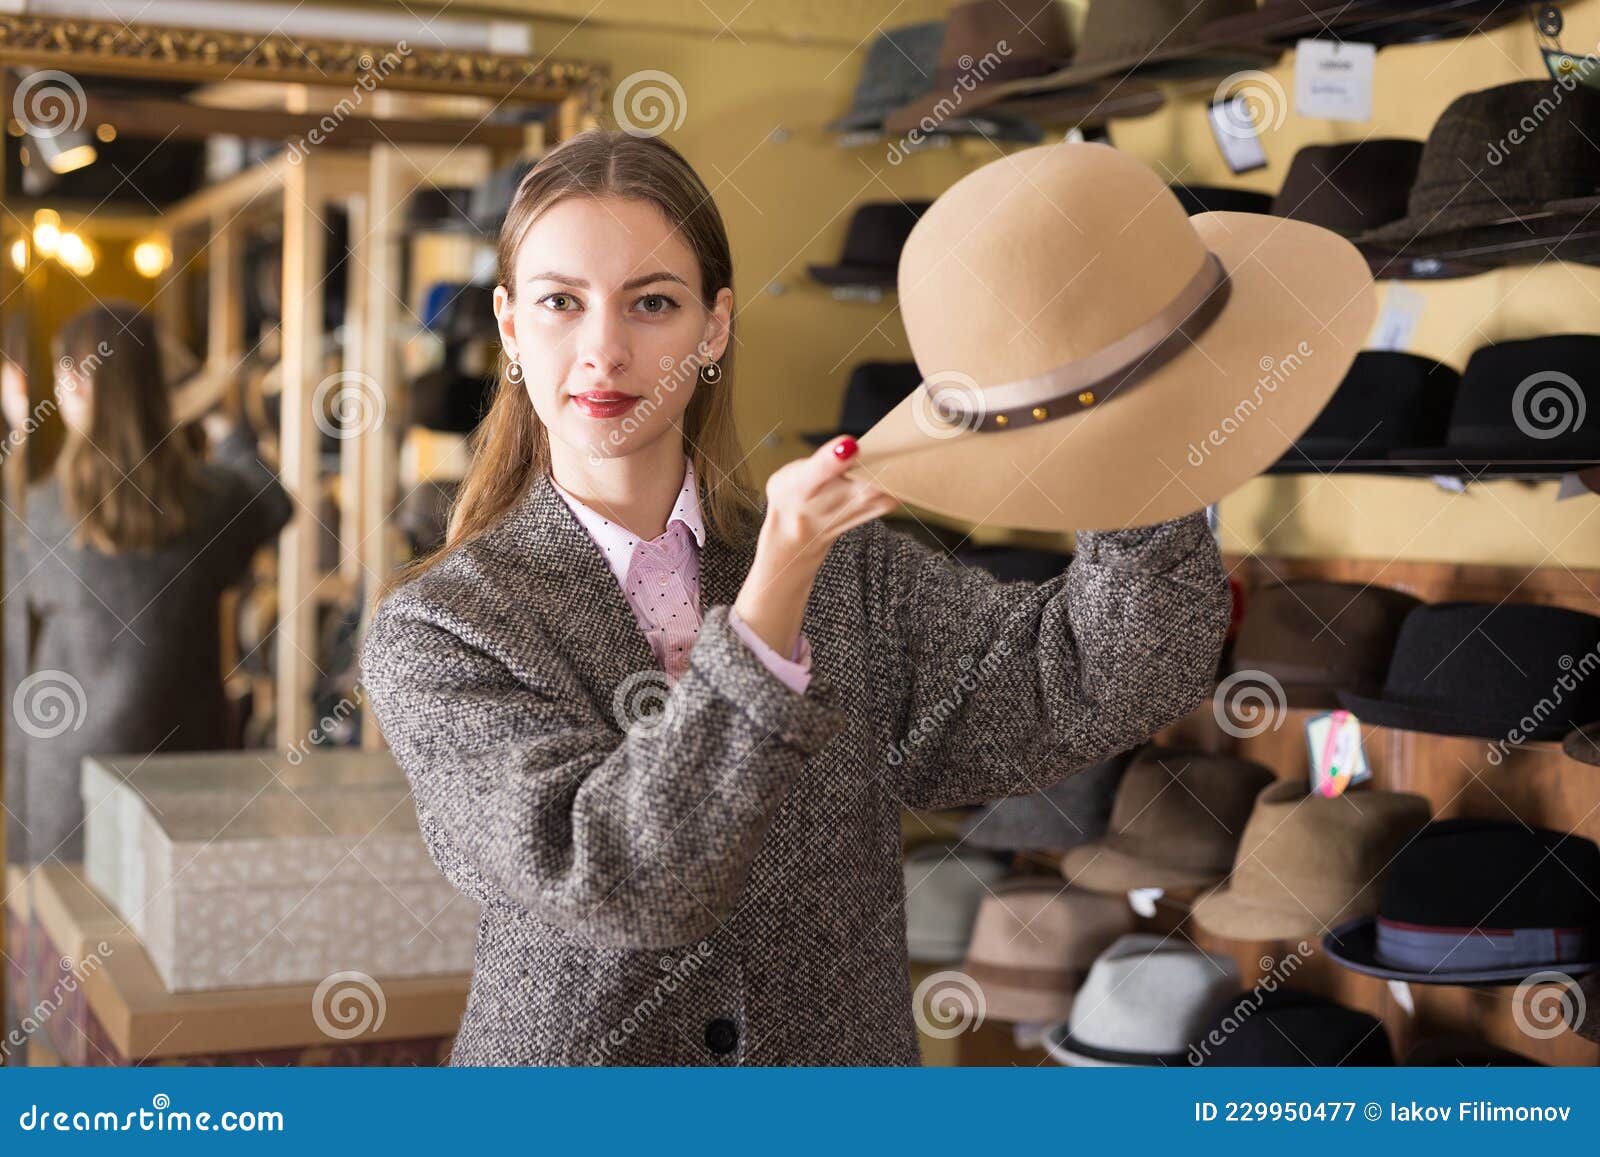 Woman Choosing Hat in Store Stock Image - Image of emotional, classic ...